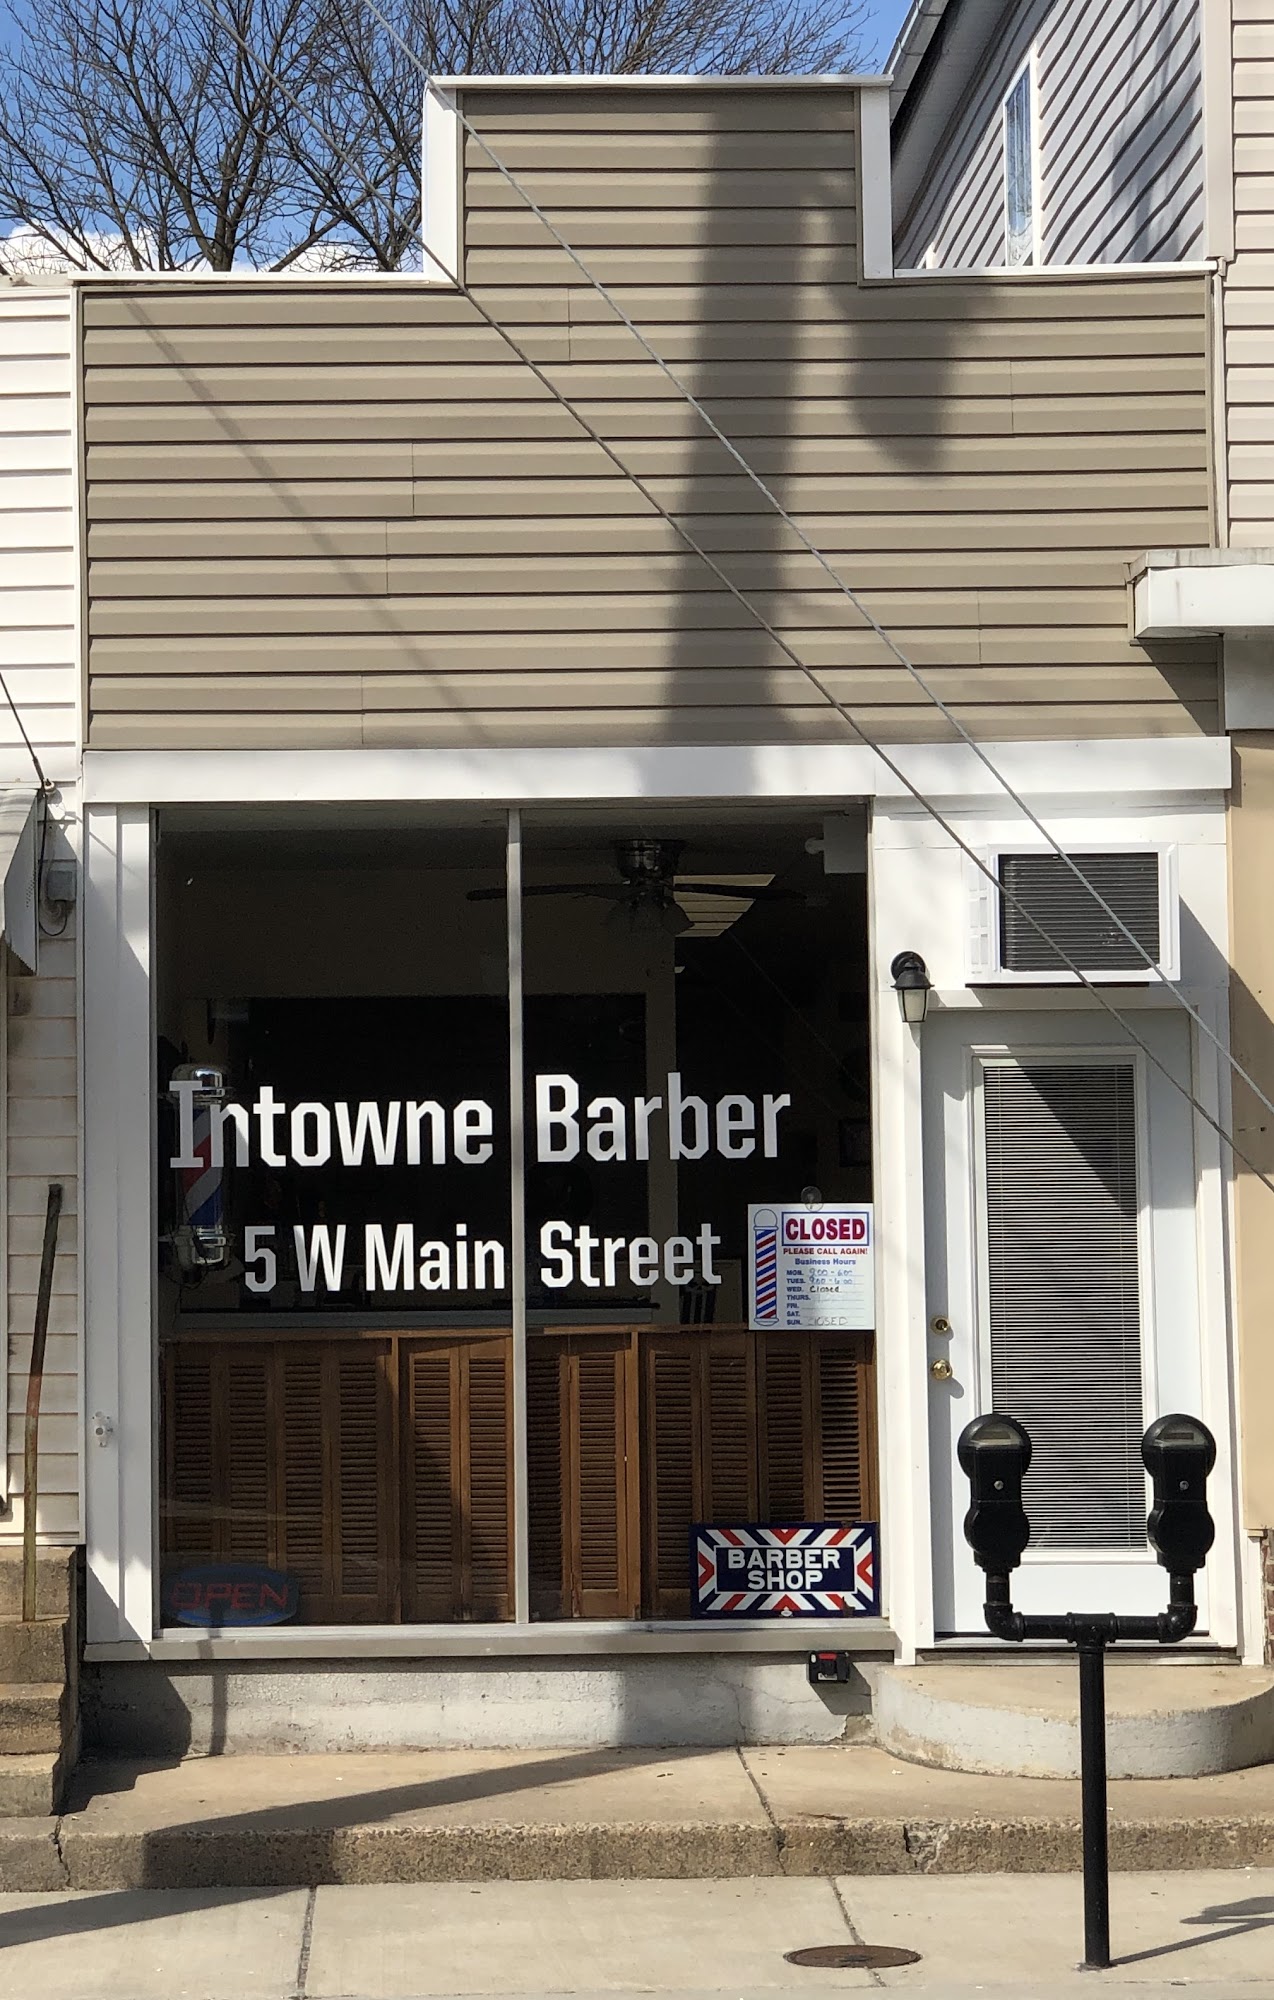 Intowne Barbers 5 W Main St, Thurmont Maryland 21788